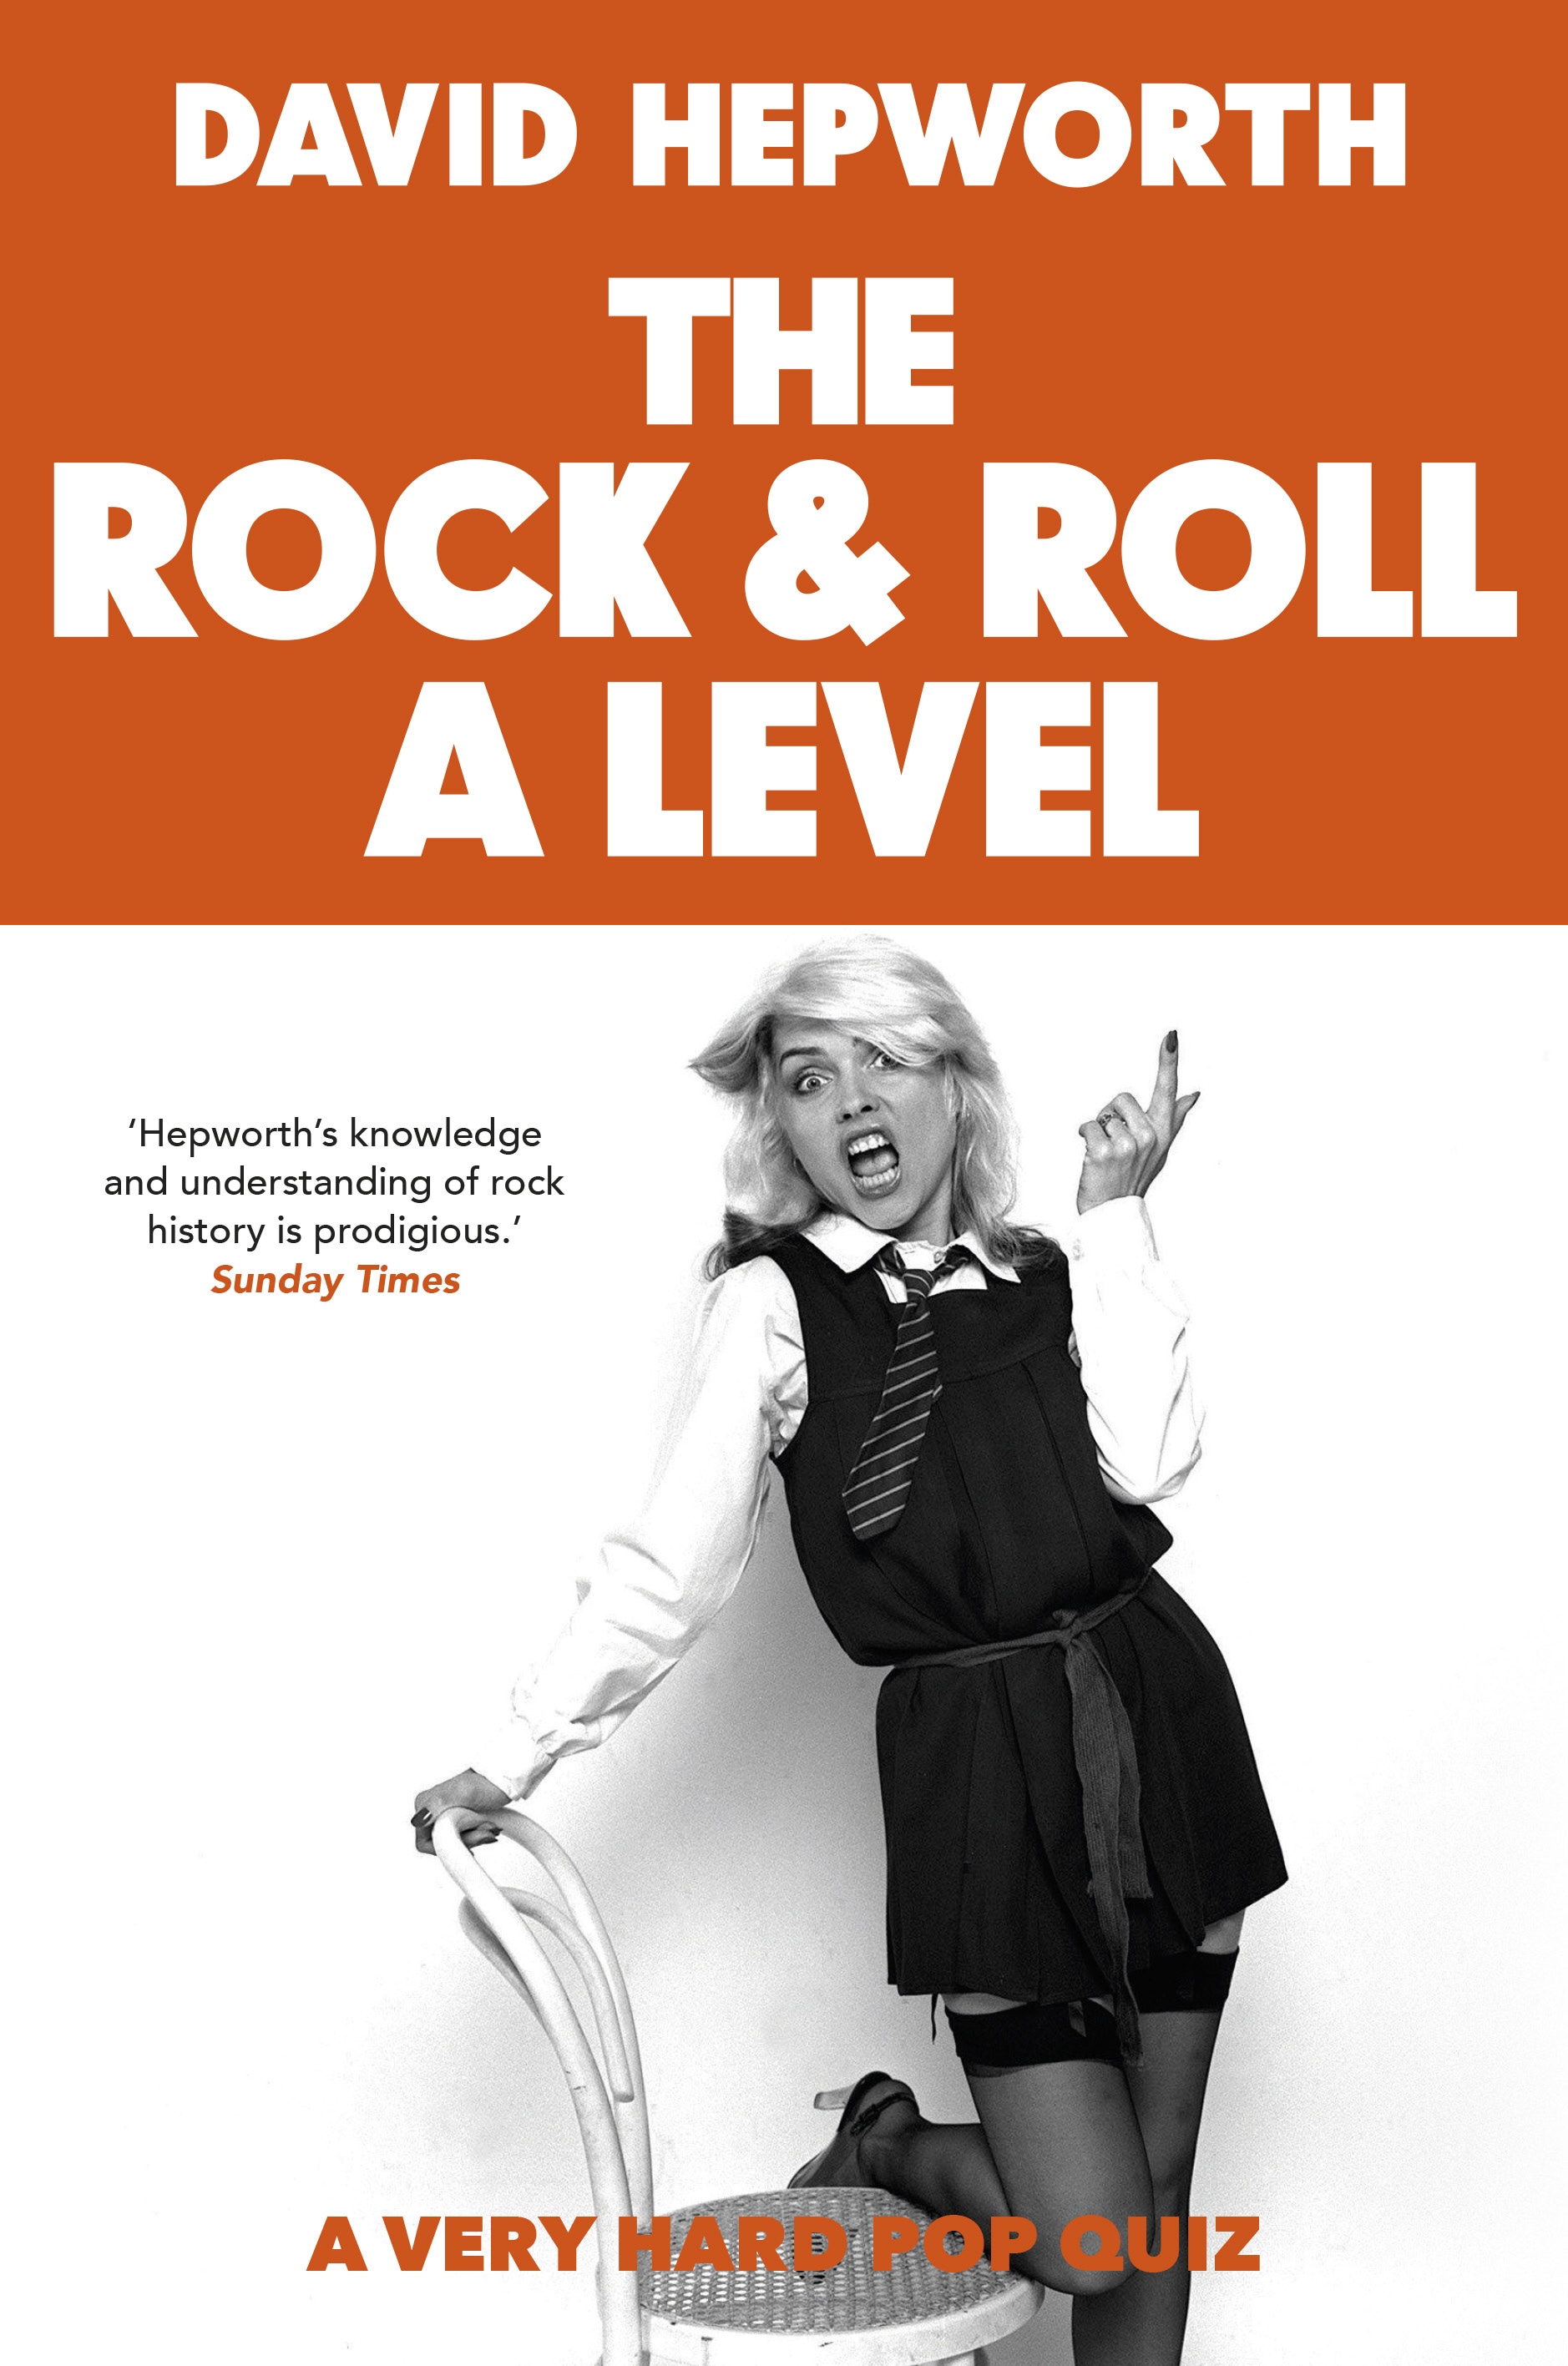 Book “Rock & Roll A Level” by David Hepworth — October 29, 2020